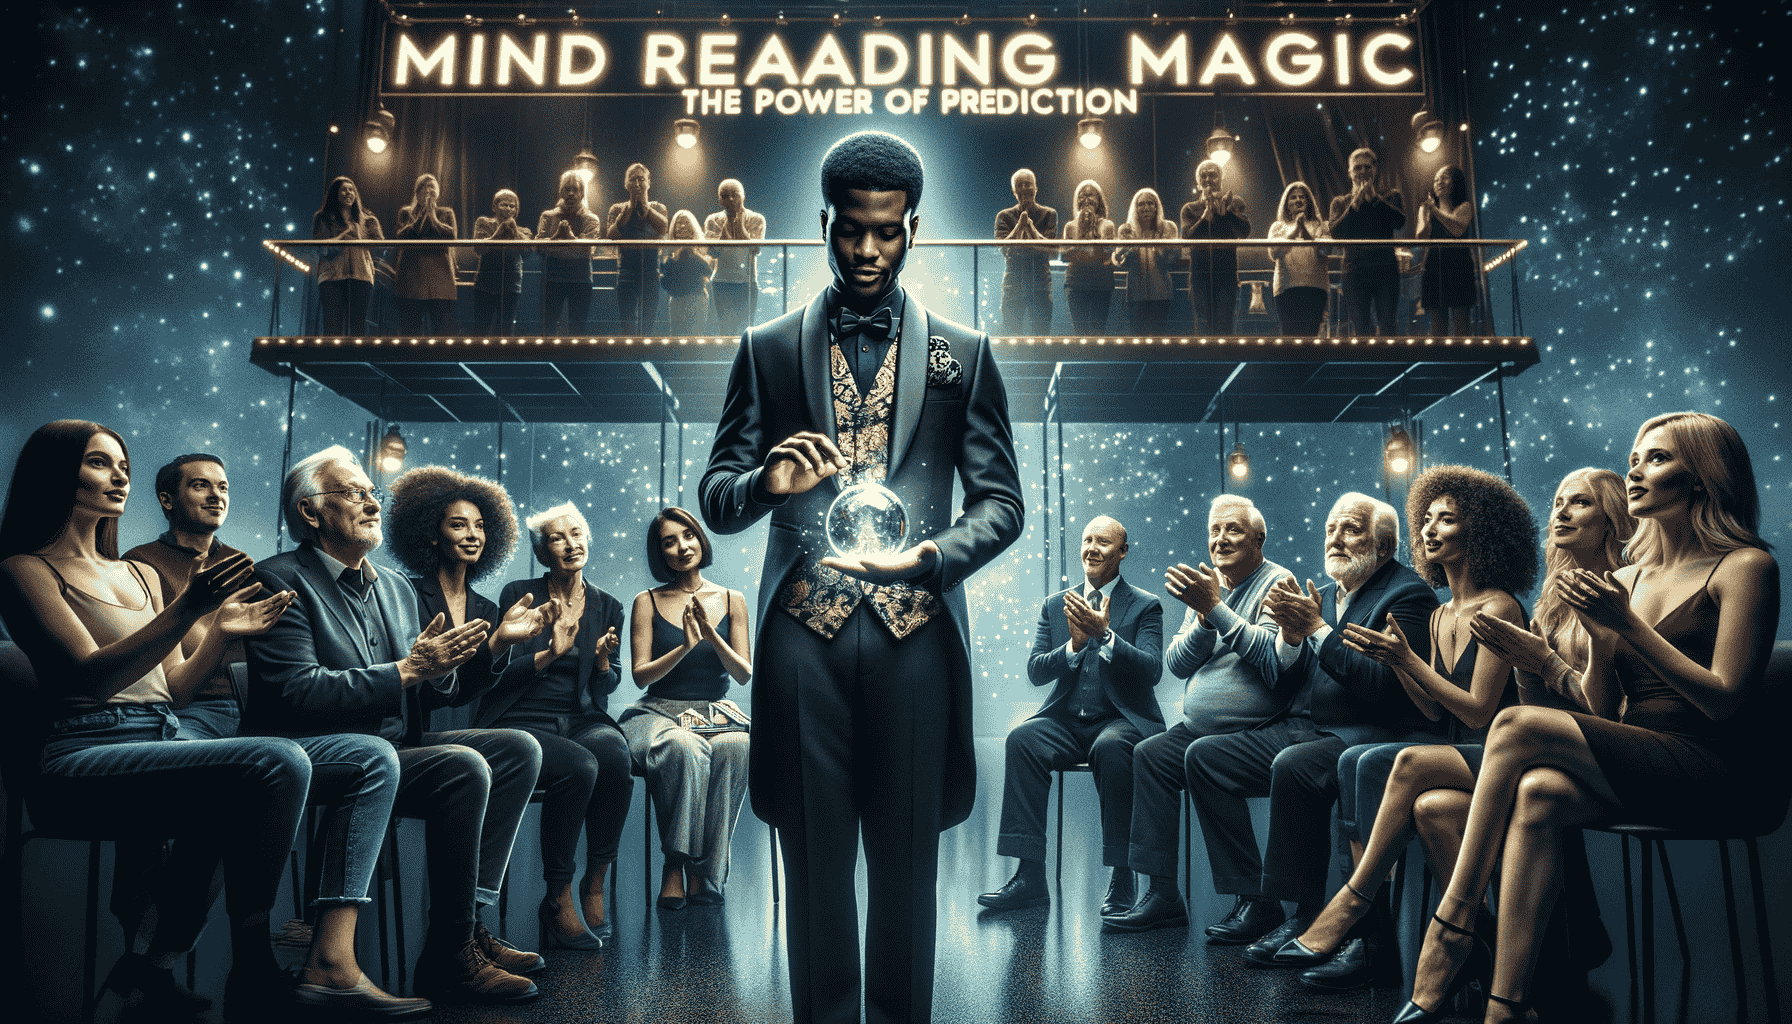 Mind Reading Magic The Power of Prediction